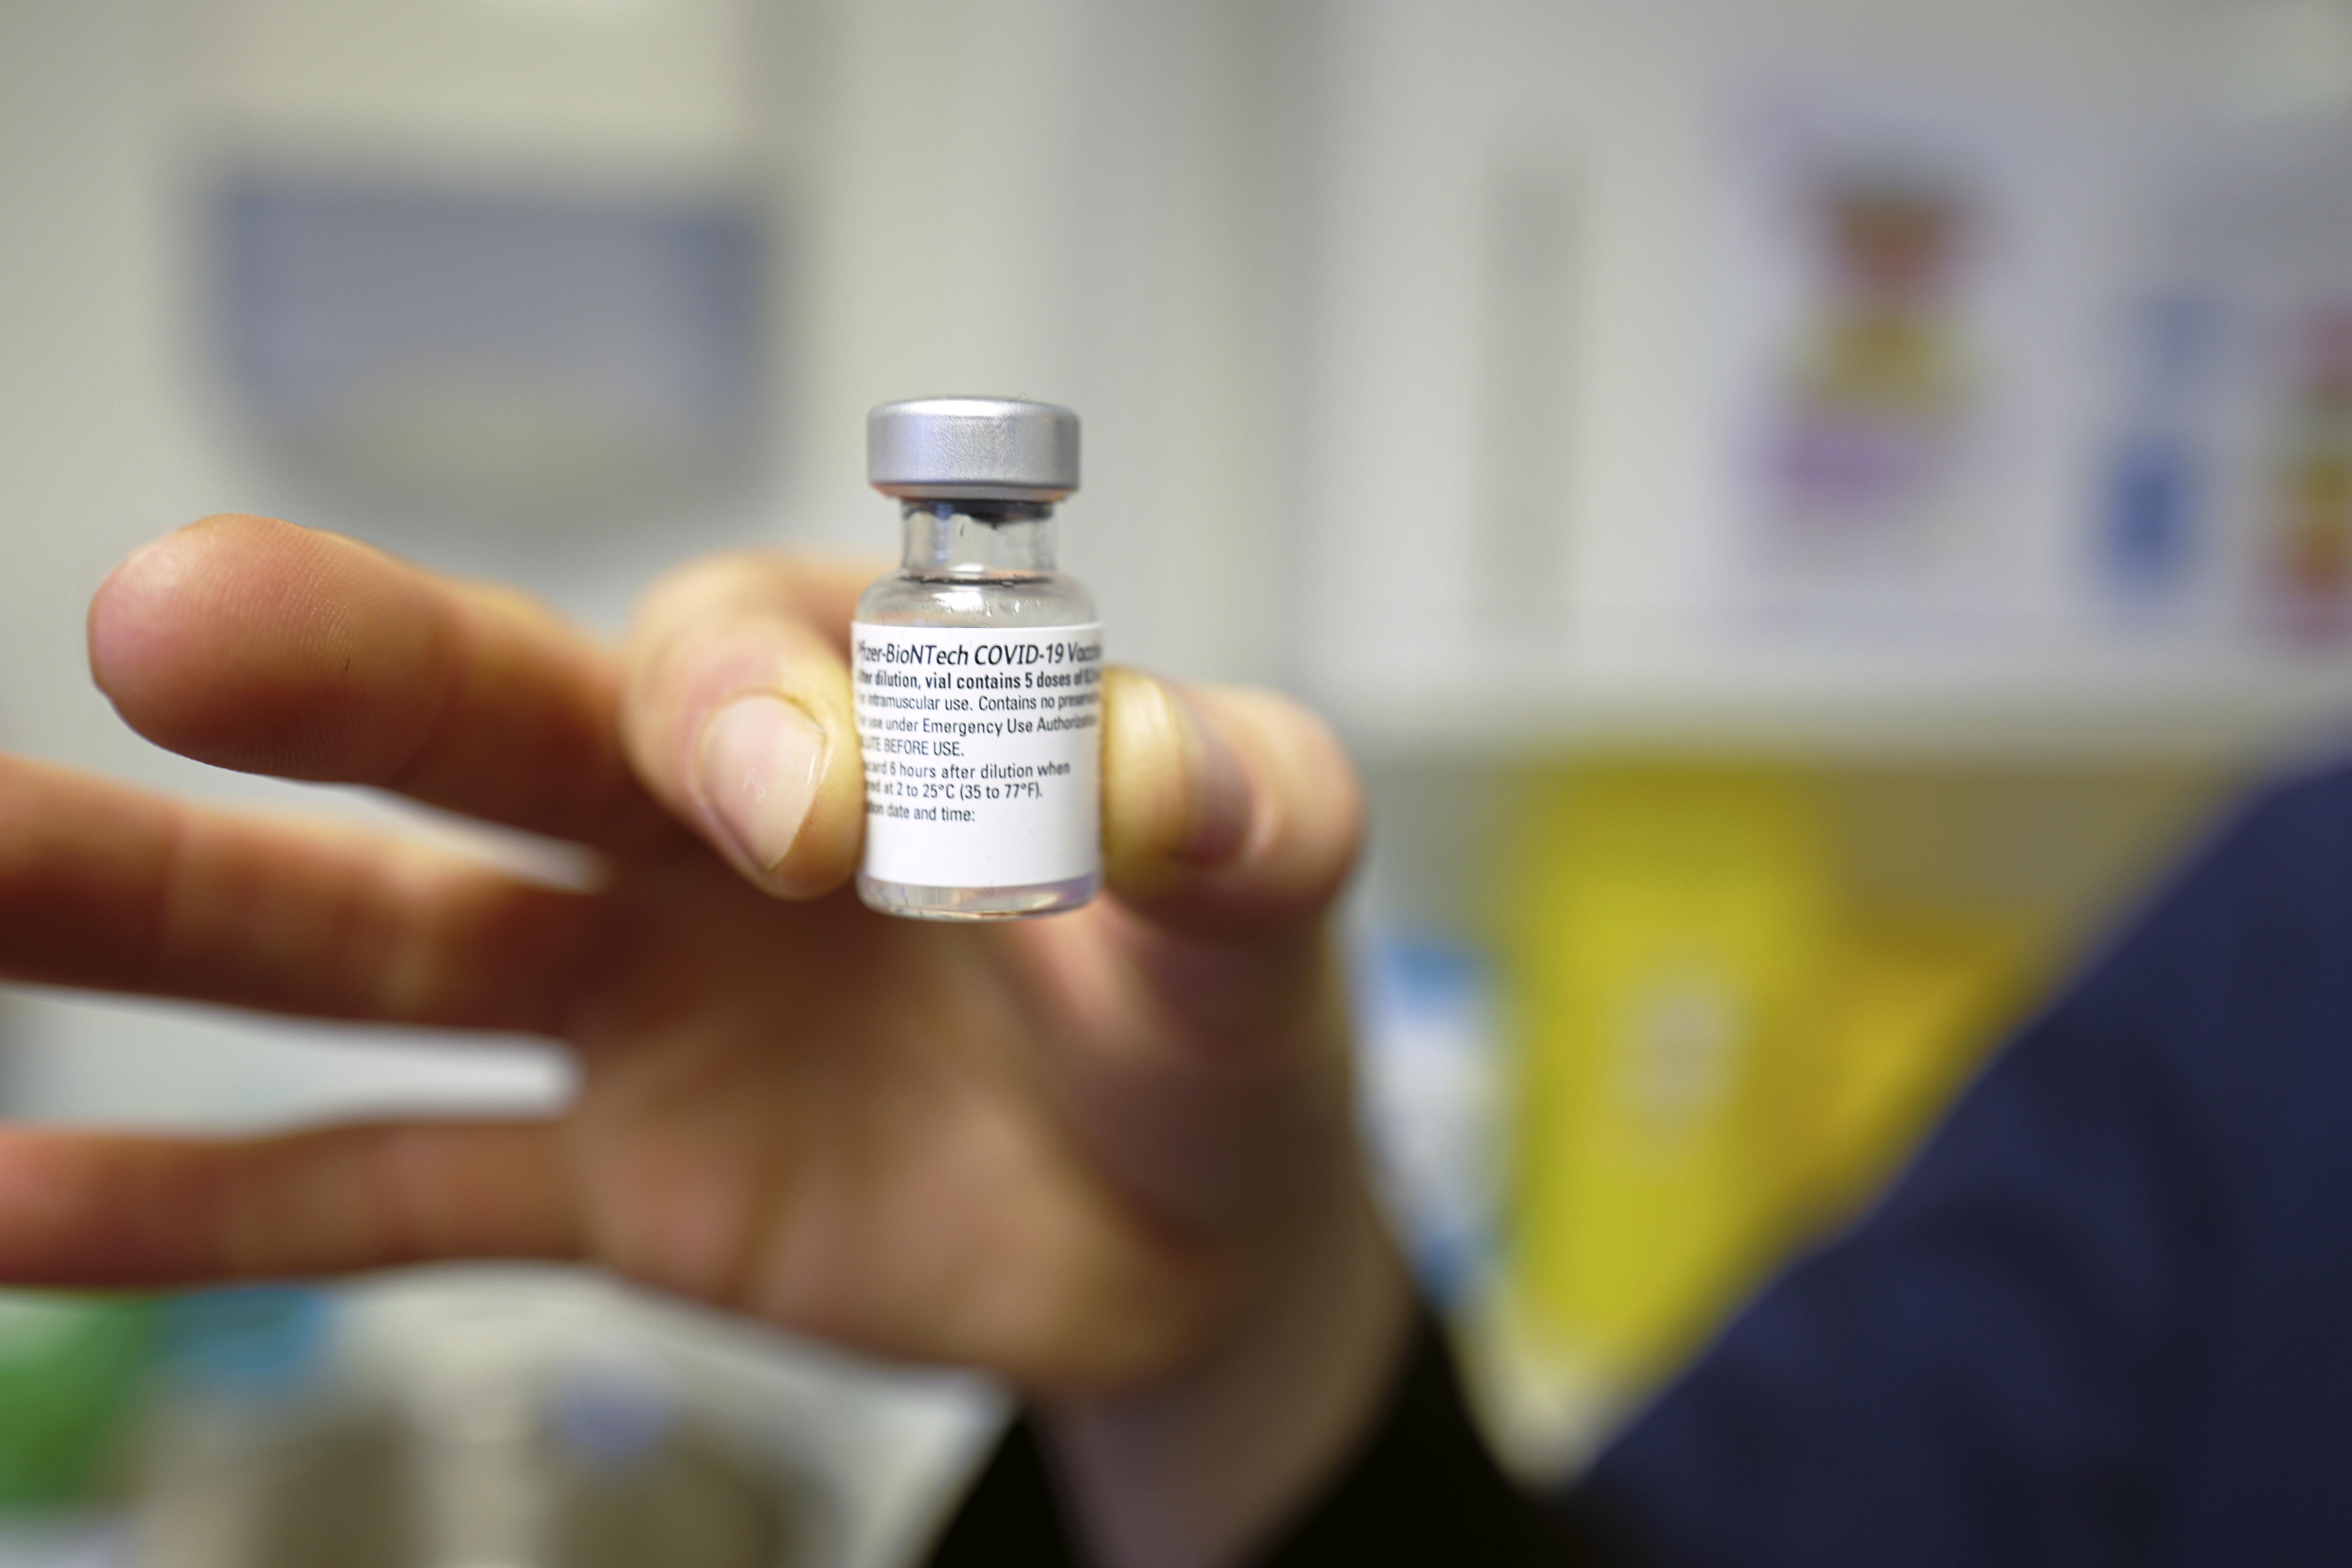 The Pfizer-BioNTech Covid-19 vaccination vial.